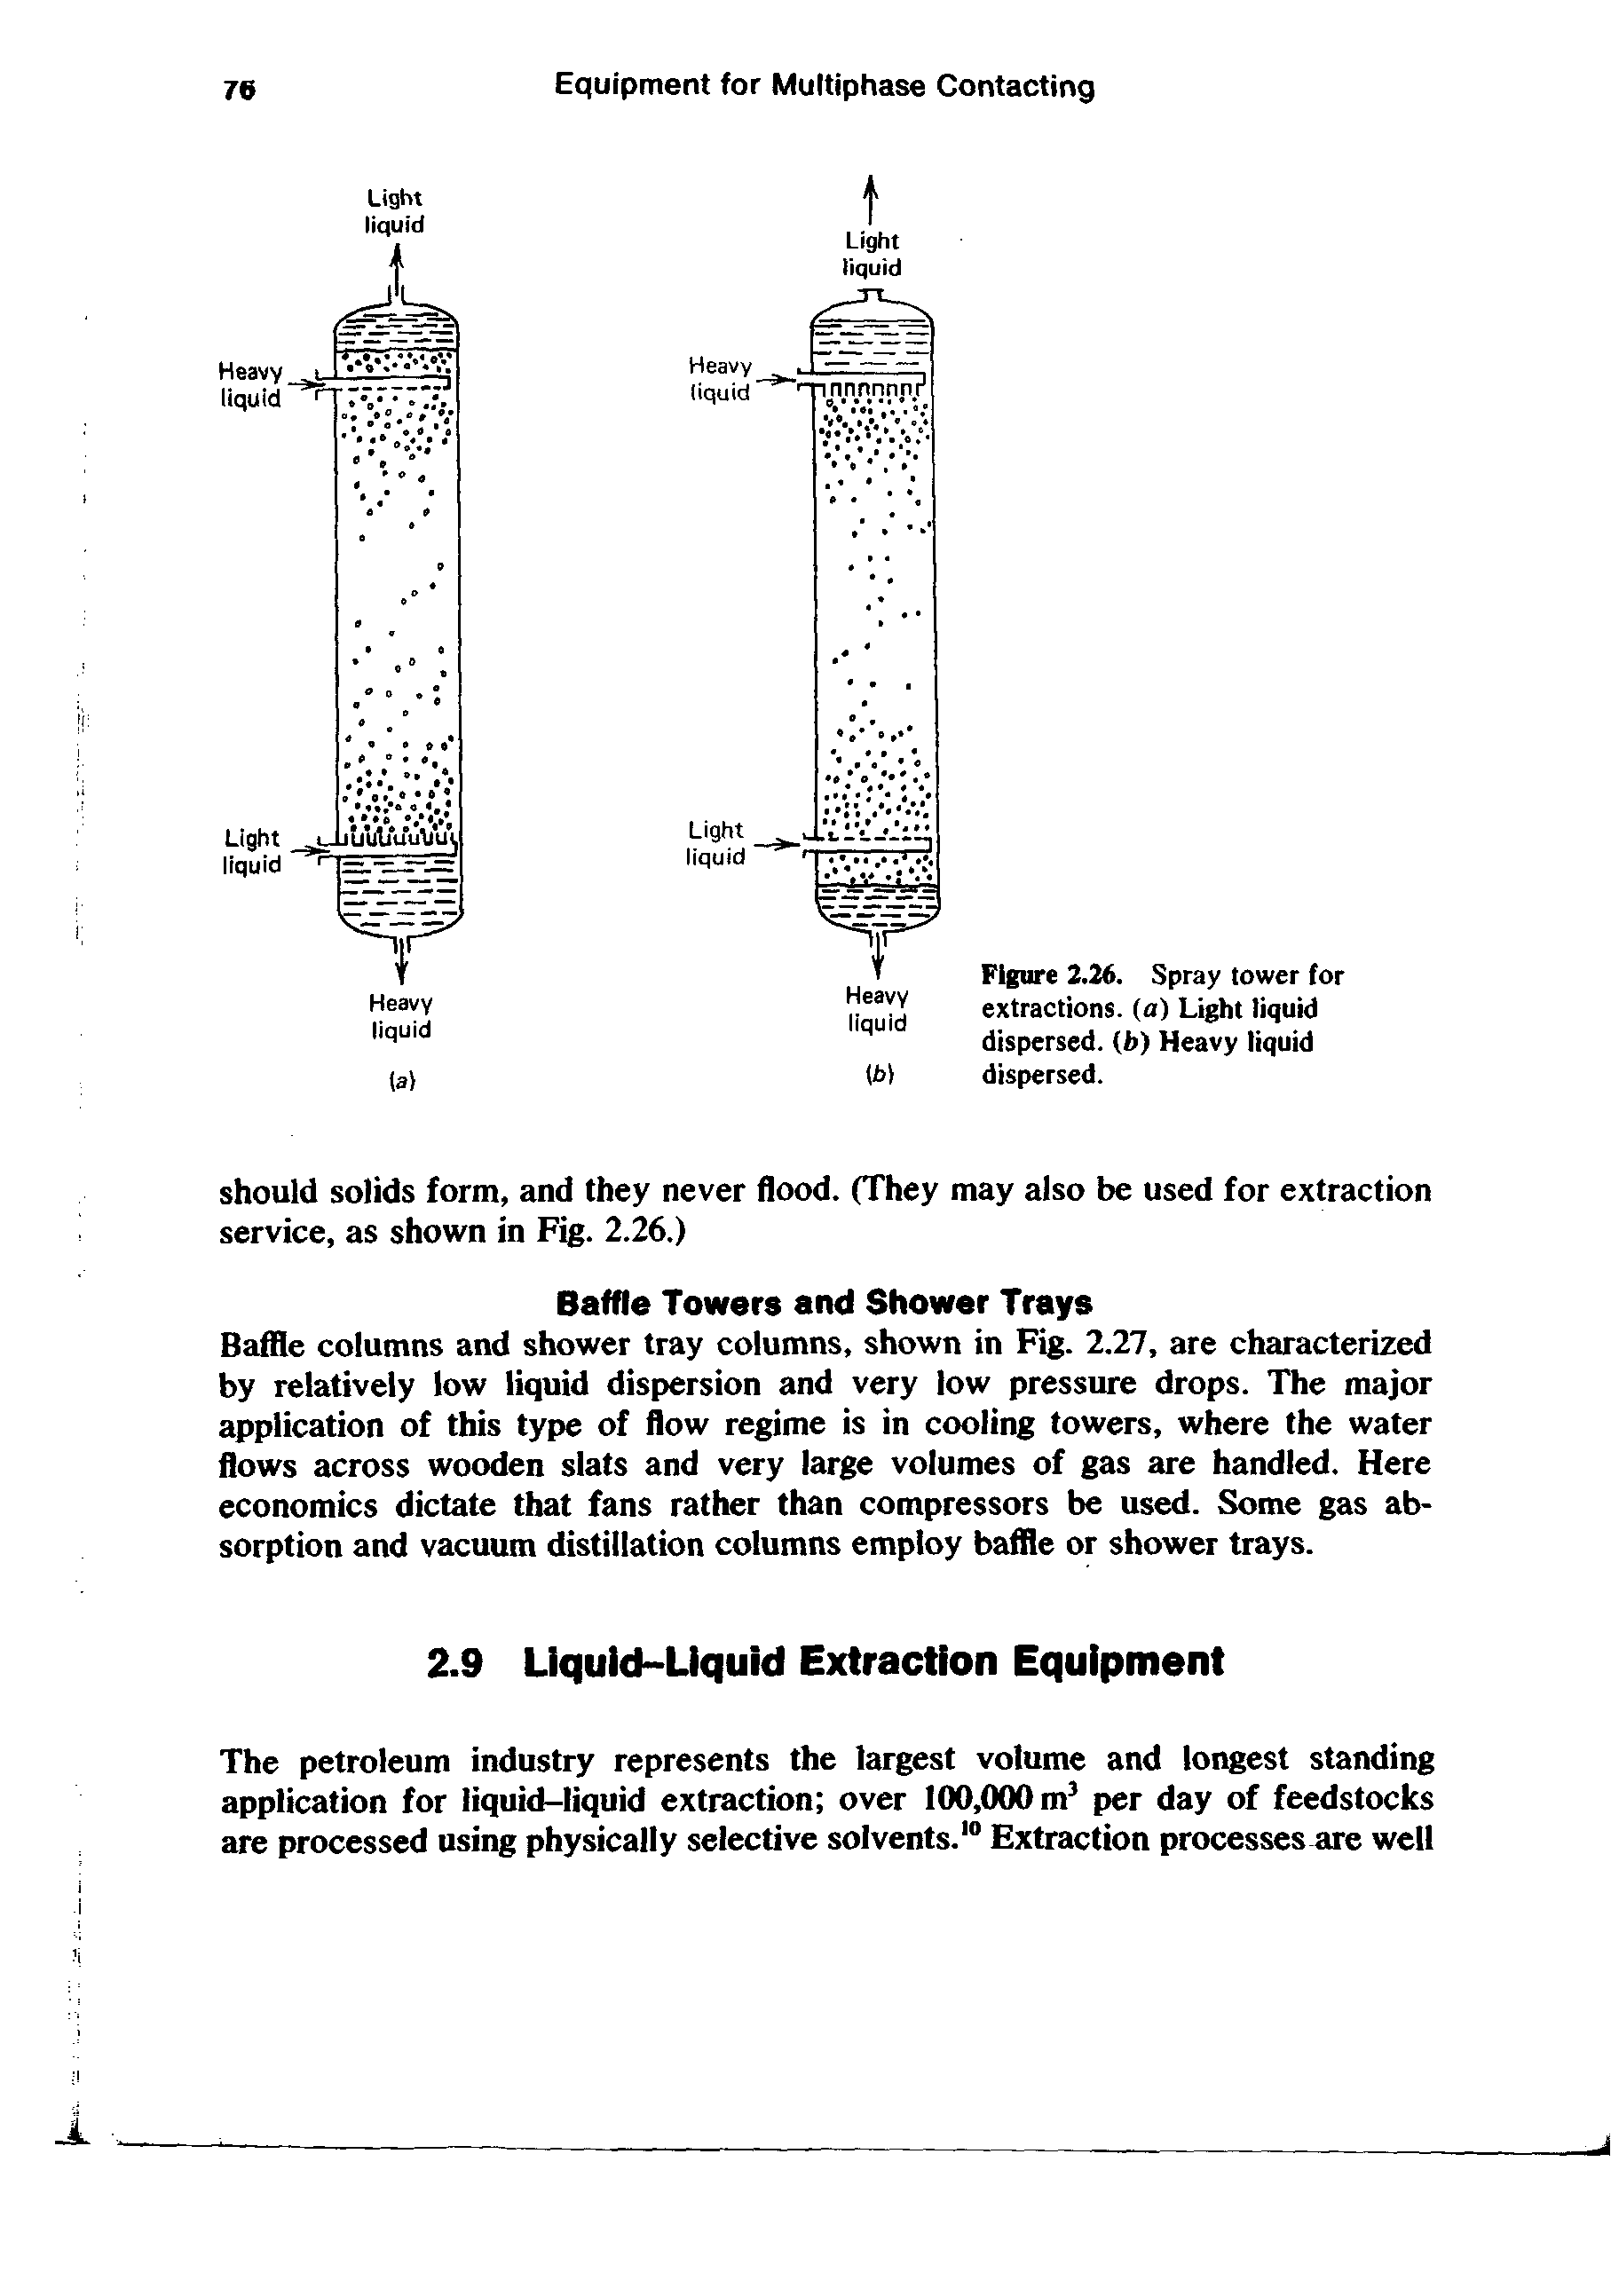 Figure 2.26. Spray tower for extractions, (a) Light liquid dispersed, (h) Heavy liquid dispersed.